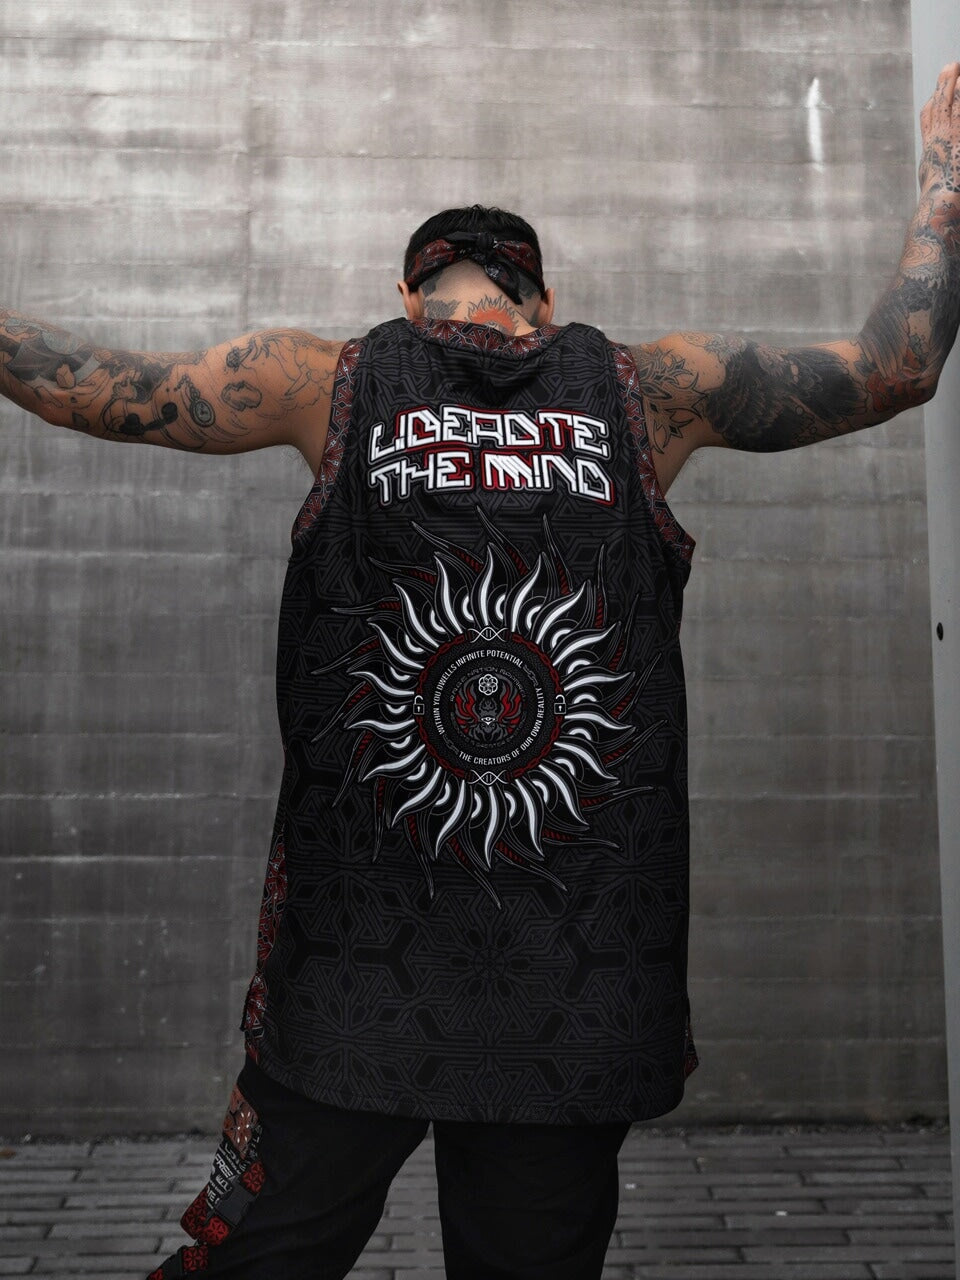 PROTECTED BY INTENT ✦ DELUXE ✦ Basketball Jersey Tank Top 